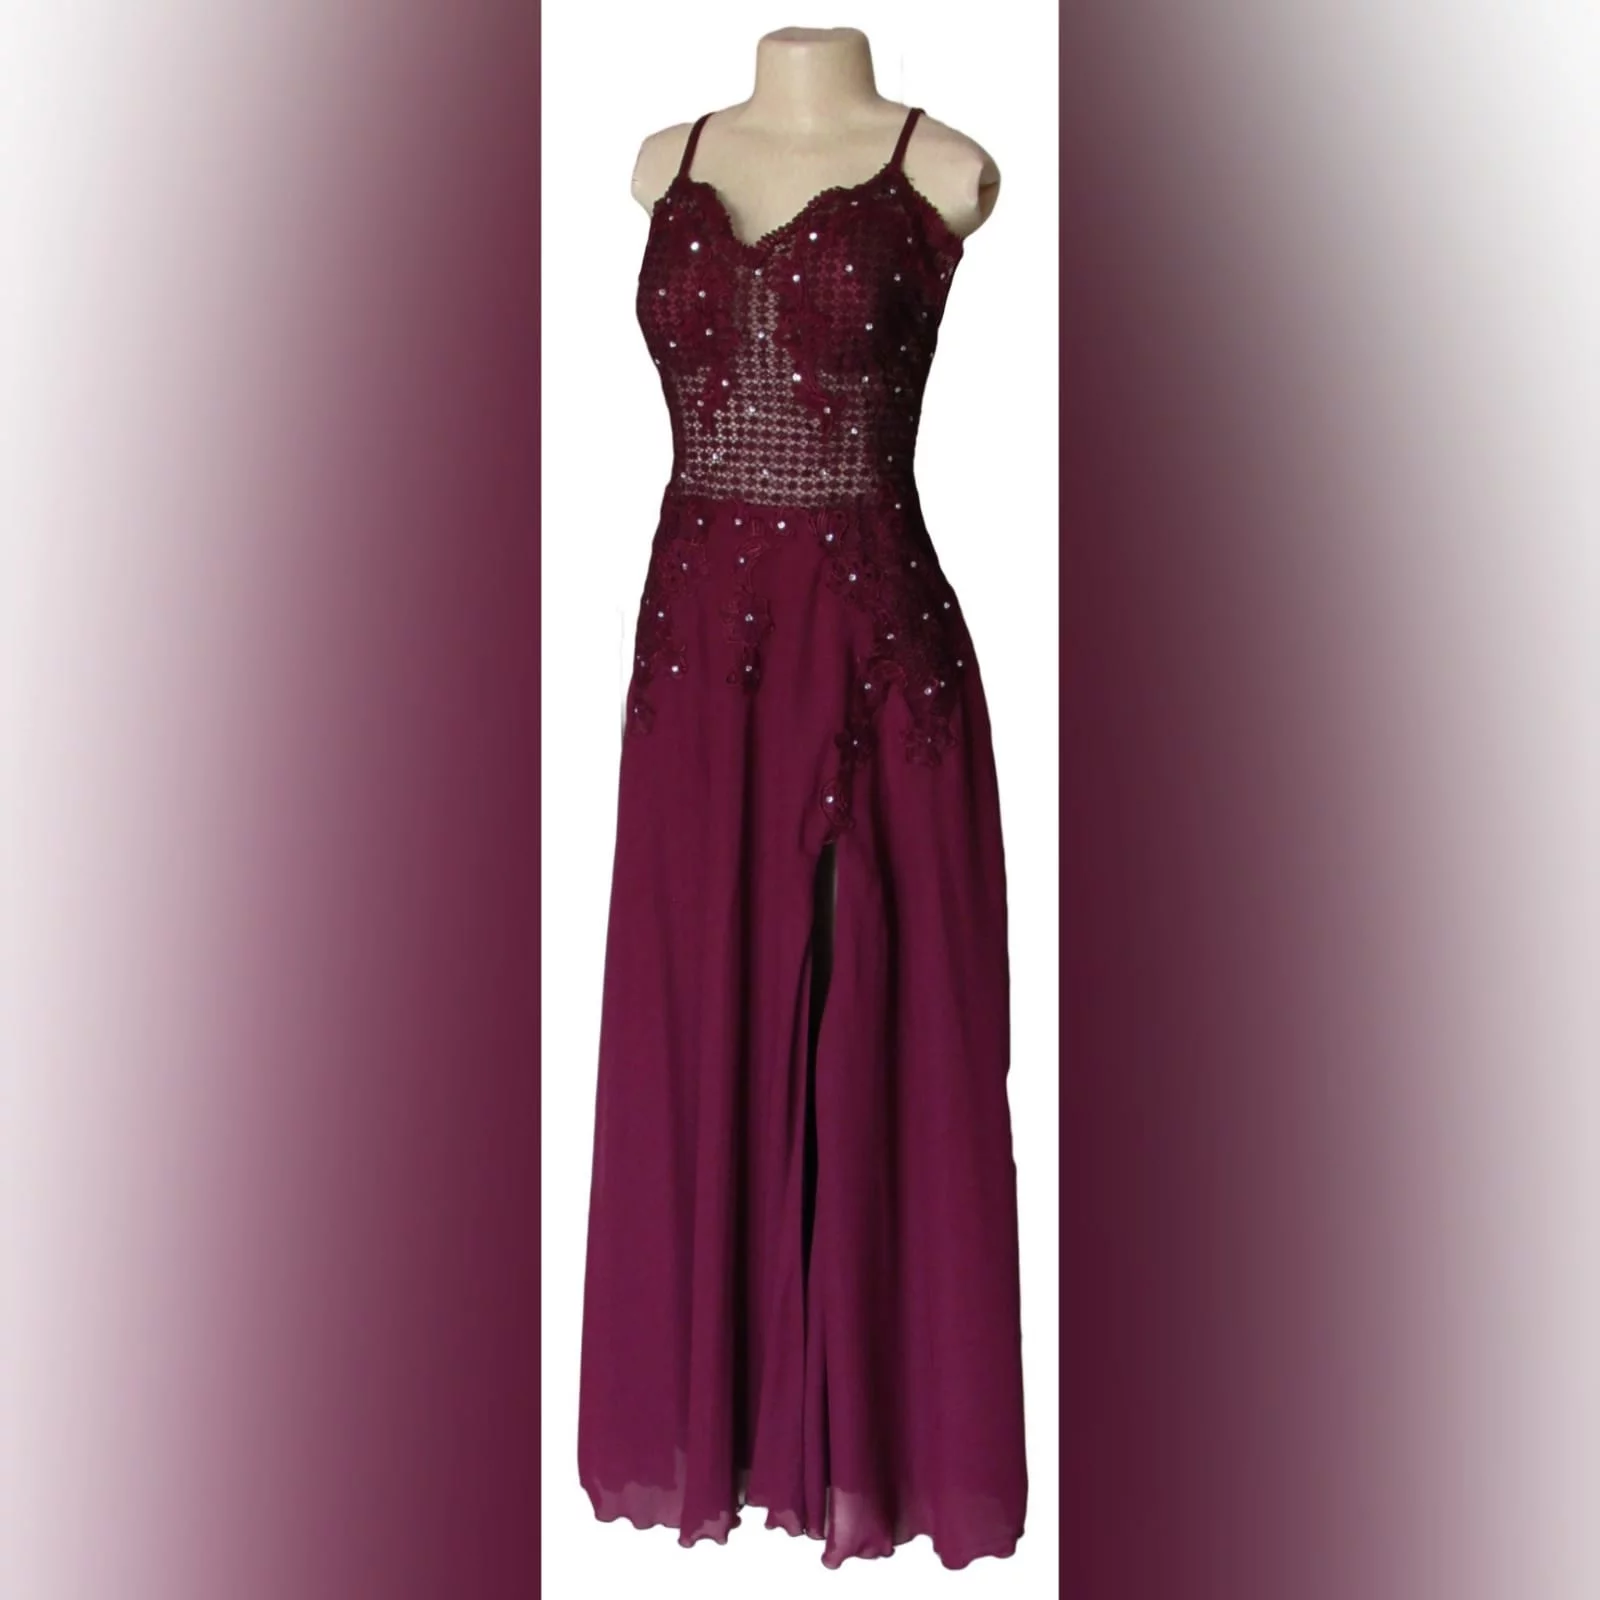 Burgundy chiffon and lace matric dance dress 4 burgundy chiffon and lace matric farewell dress. Bodice in lace, with a v neckline and v low open back, with double shoulder crossed straps. Bodice detailed with silver beads. Bottom in flowy chiffon with a slit.